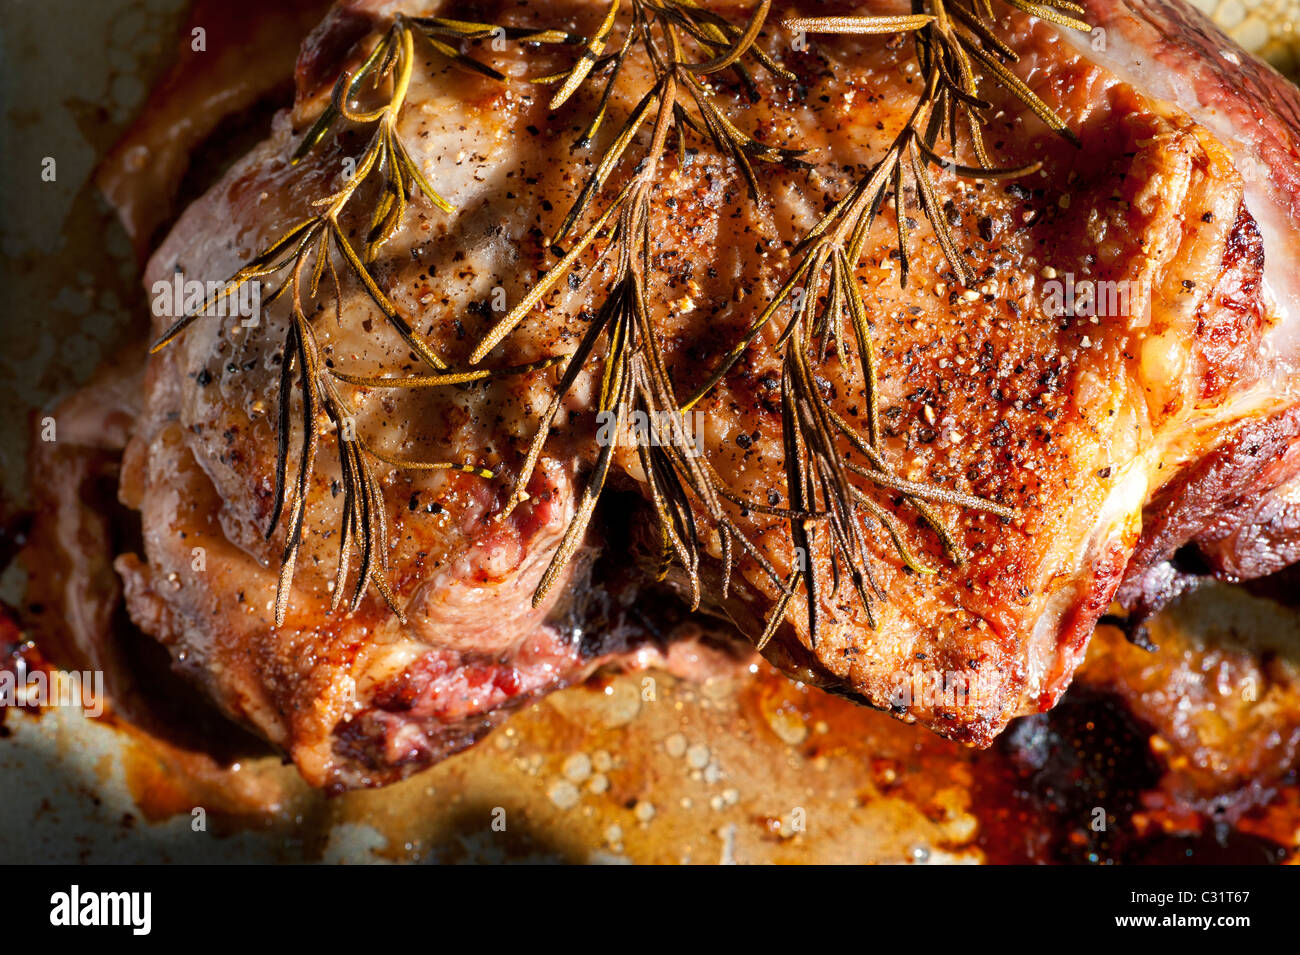 Fresh roasted lamb shoulder joint prepared with rosemary and herbs direct from the oven Stock Photo